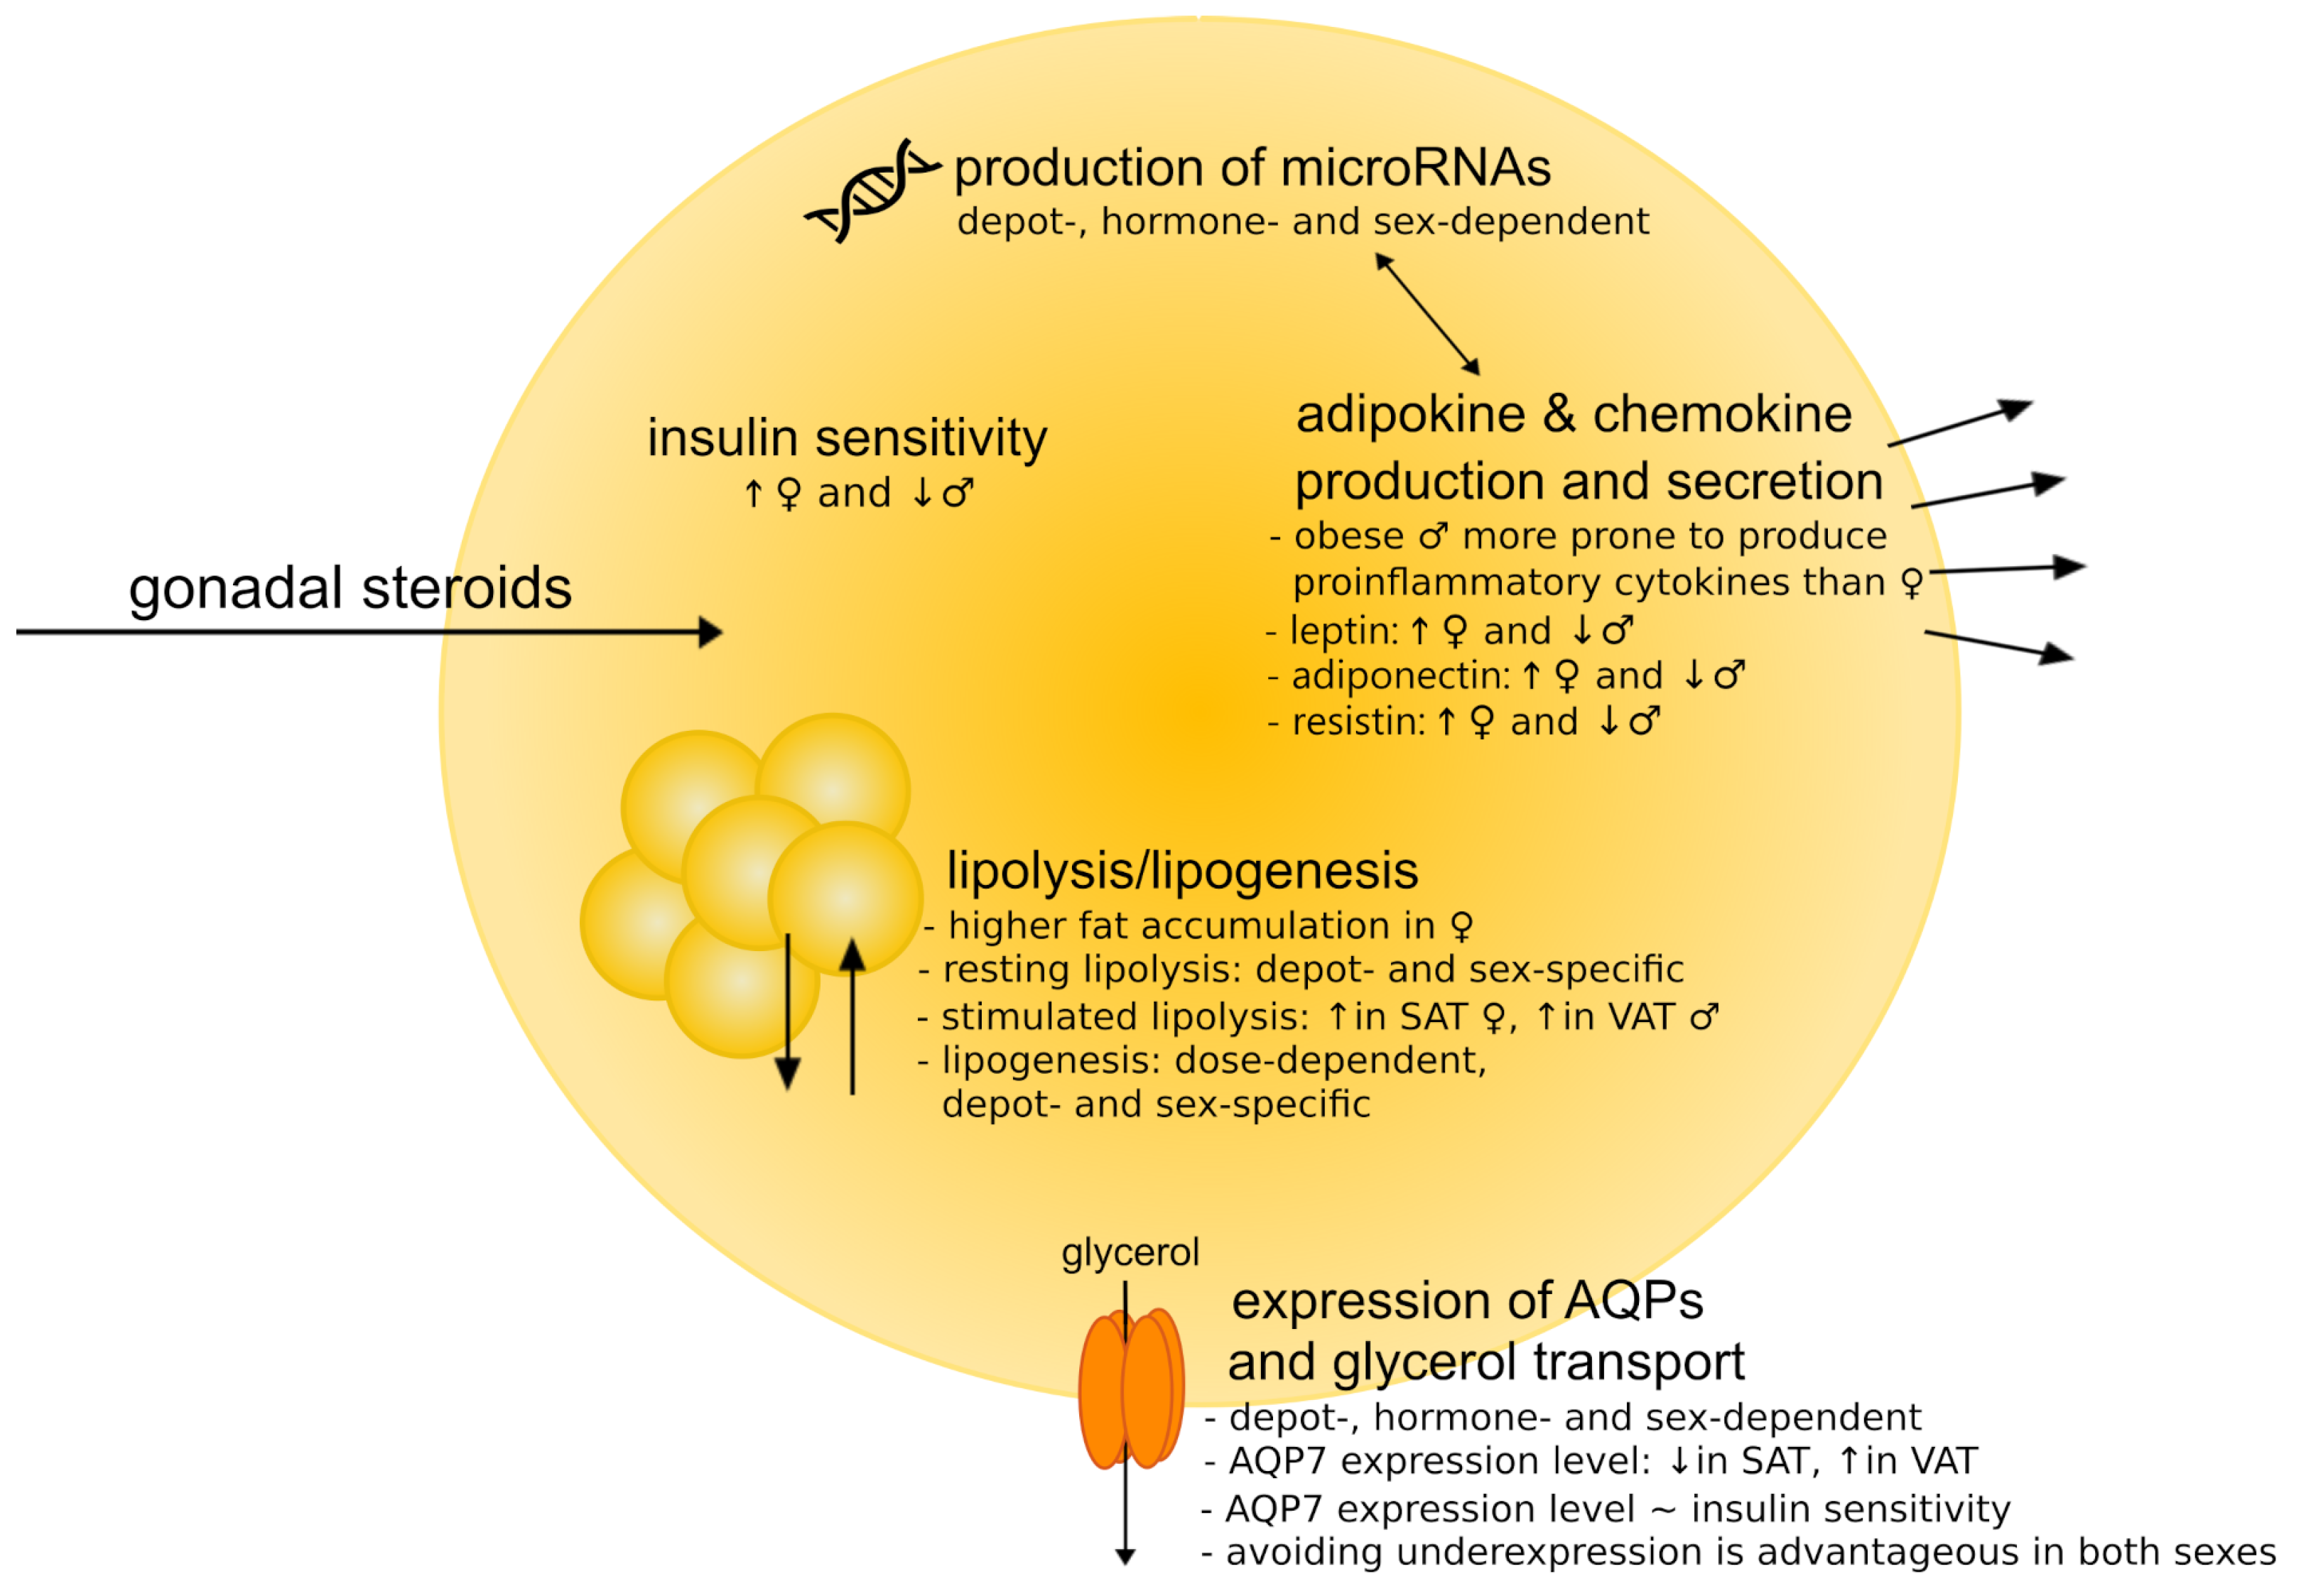 IJMS Free Full-Text Recent Update on the Molecular Mechanisms of Gonadal Steroids Action in Adipose Tissue